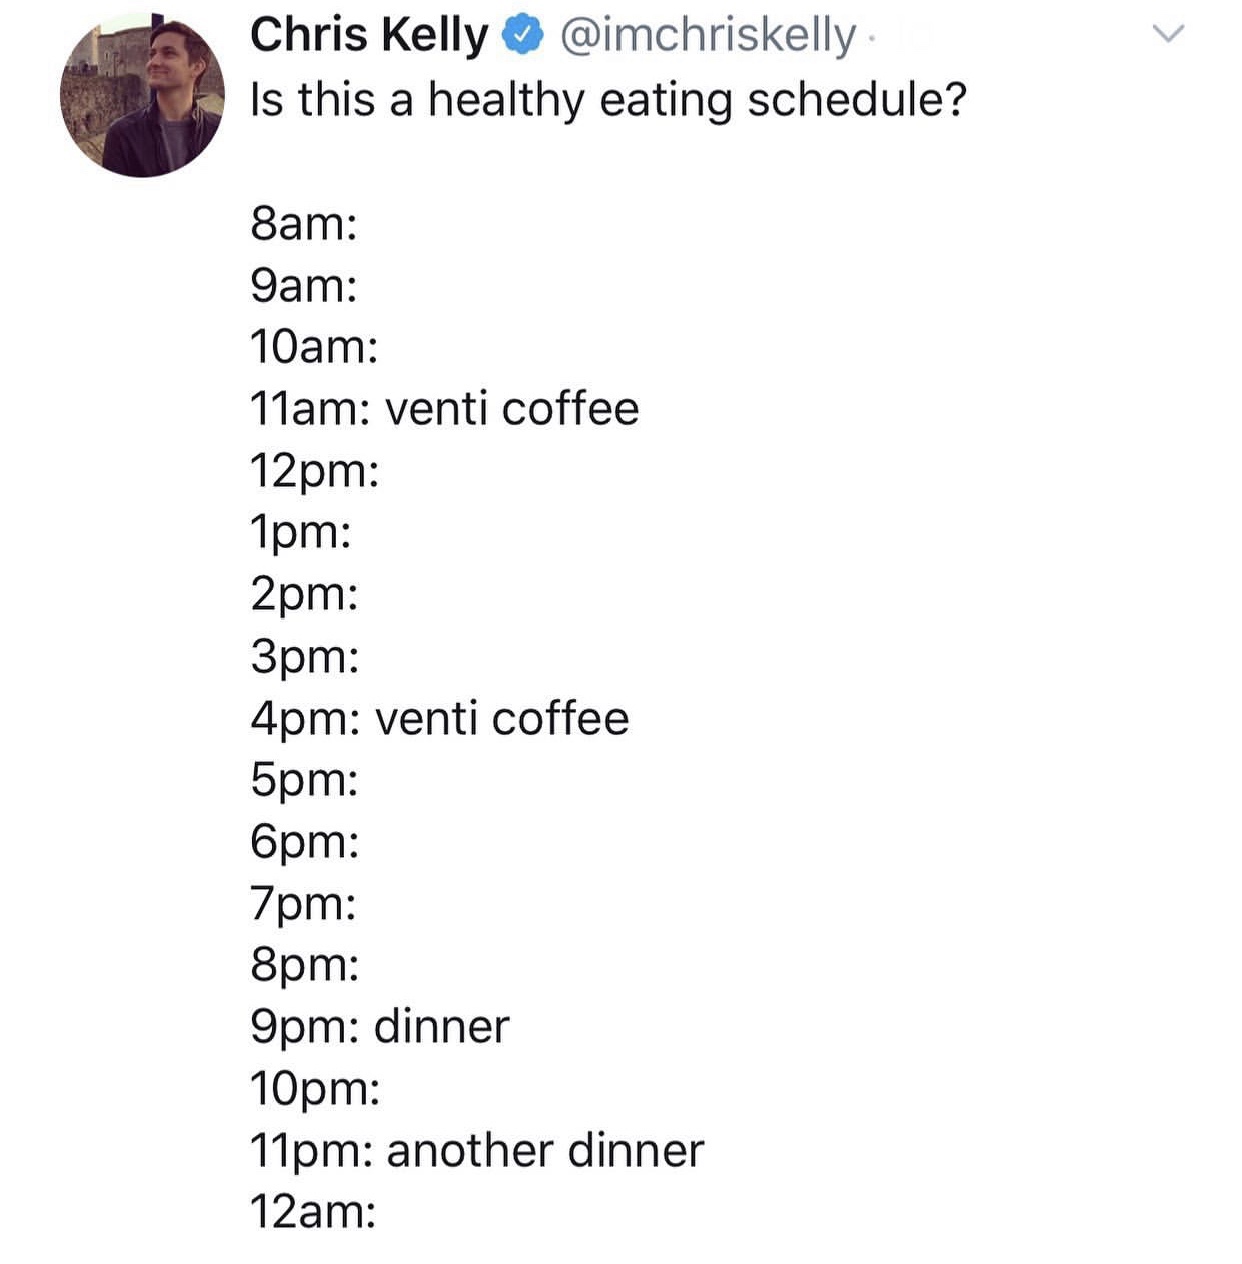 meme angle - Chris Kelly Is this a healthy eating schedule? 8am 9am 10am 11am venti coffee 12pm 1pm 2pm 3pm 4pm venti coffee 5pm 6pm 7pm 8pm 9pm dinner 10pm 11pm another dinner 12am